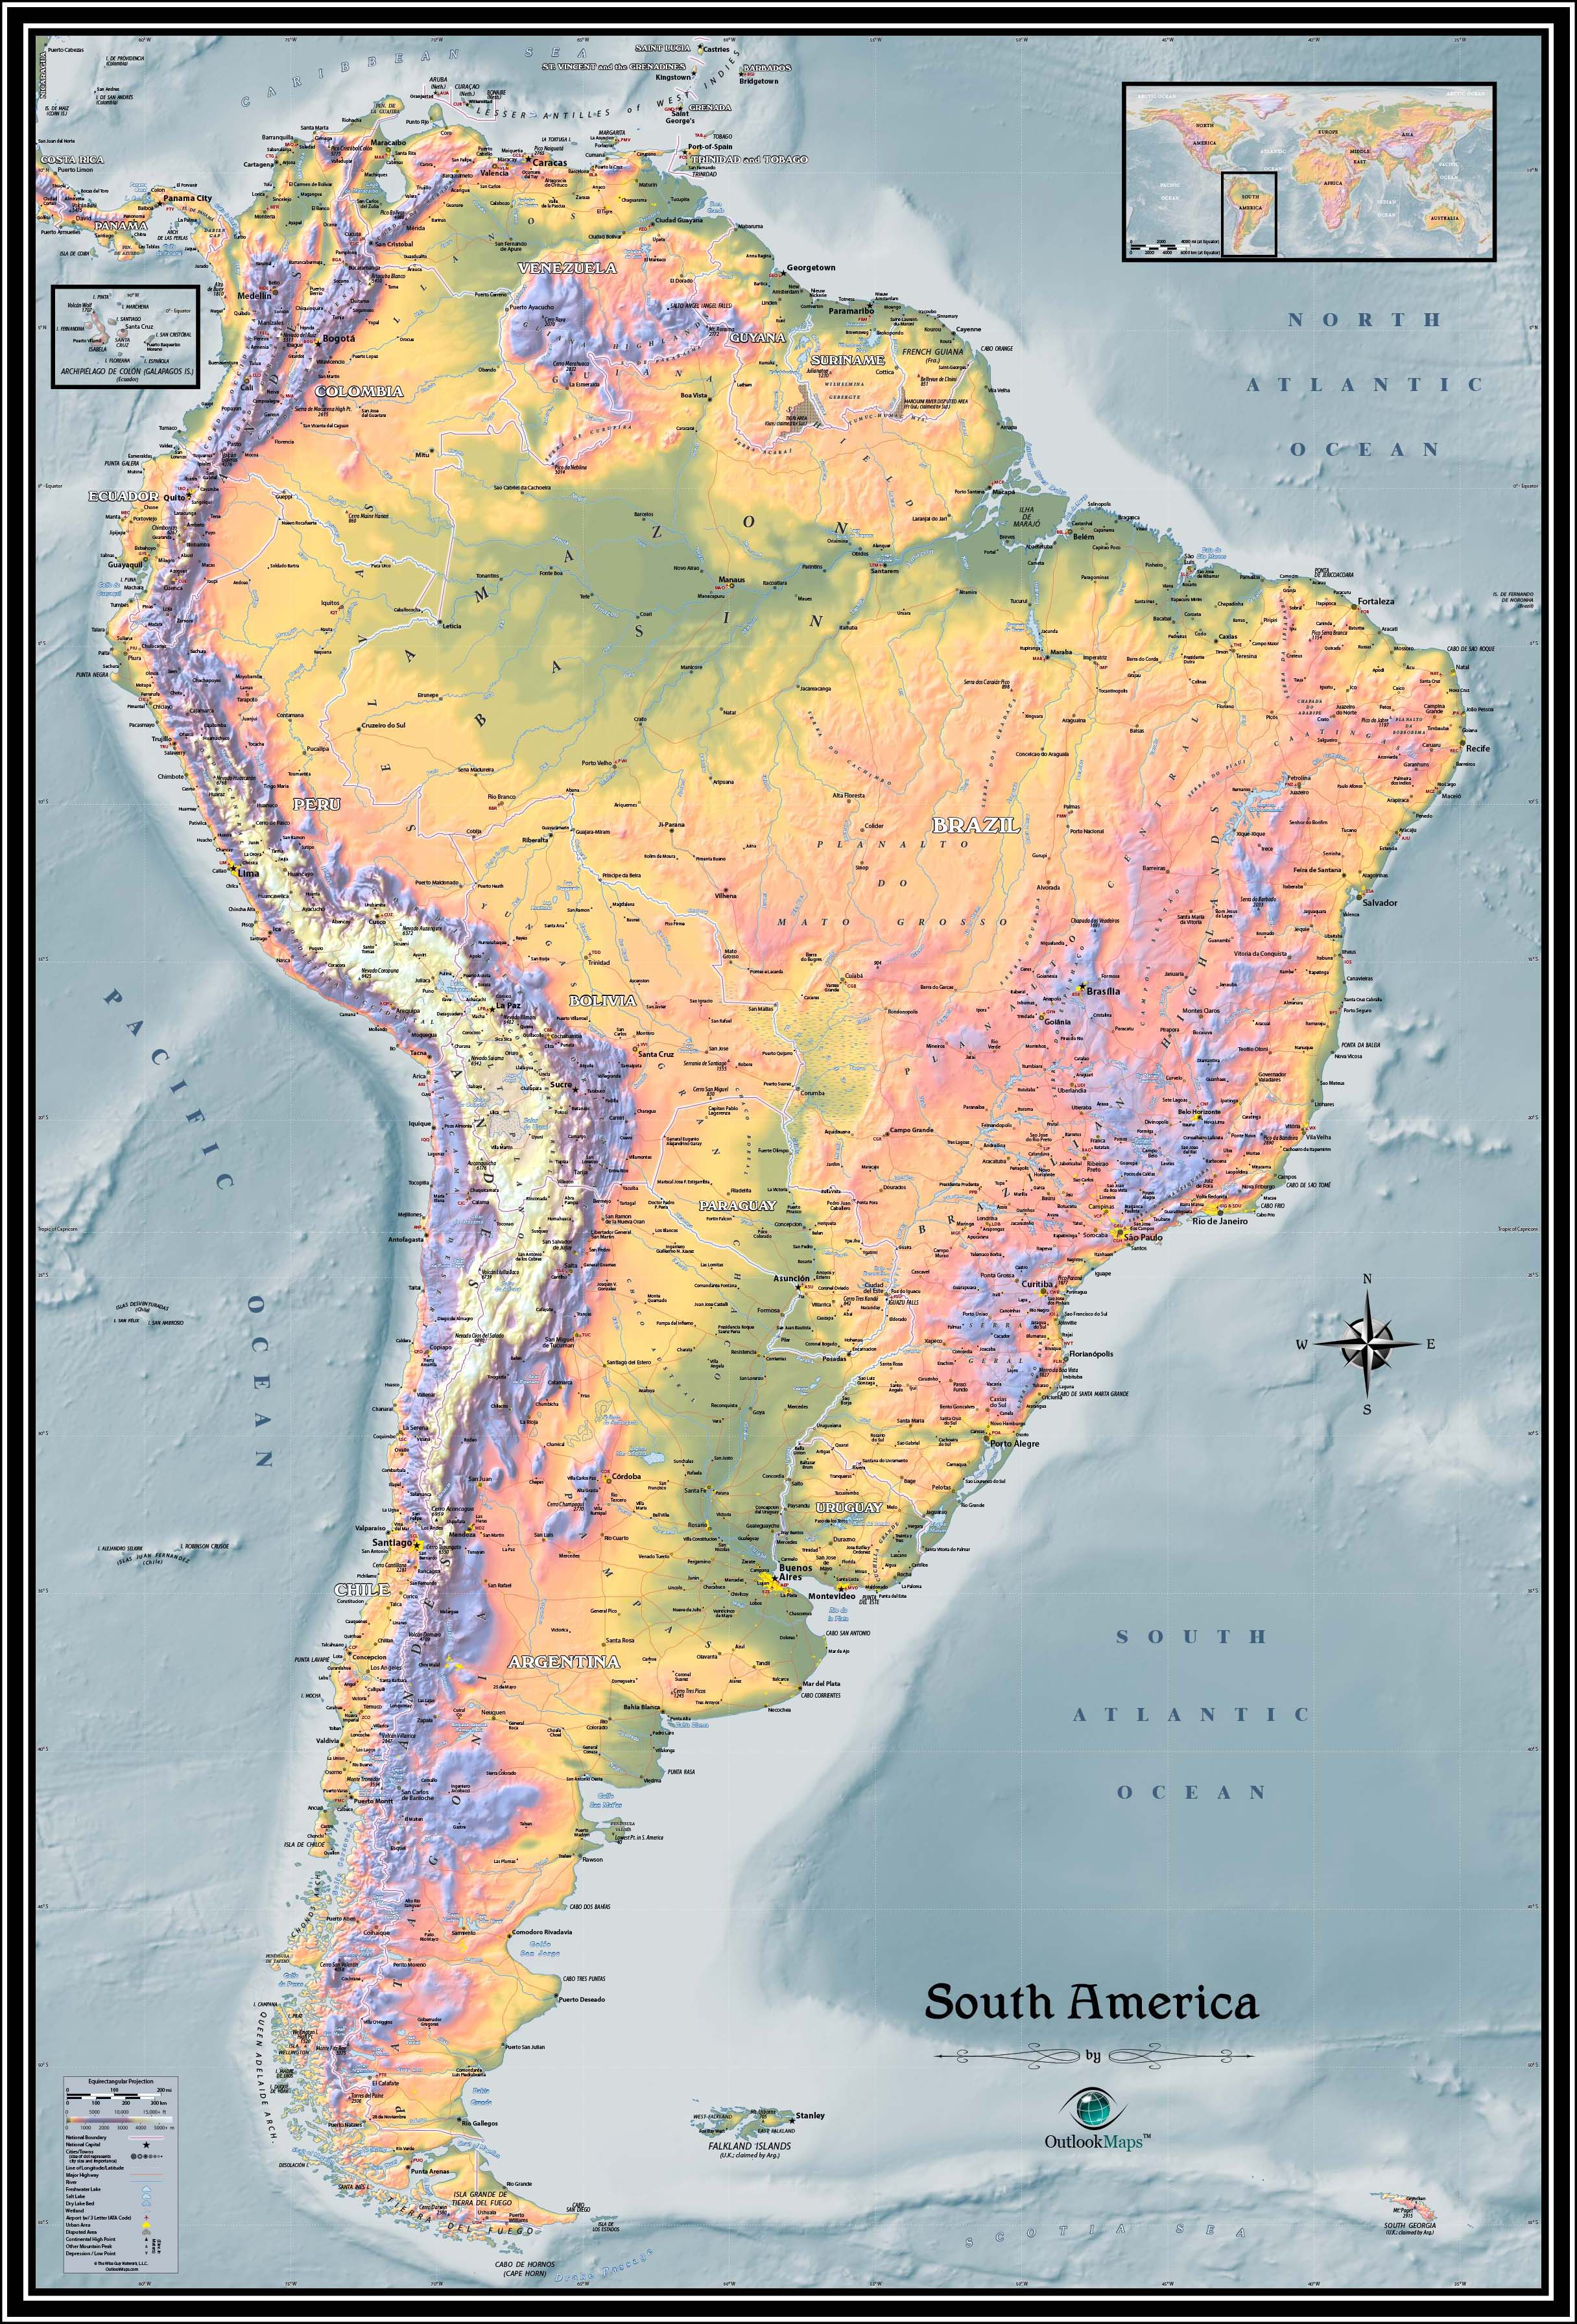 south-america-physical-features-map